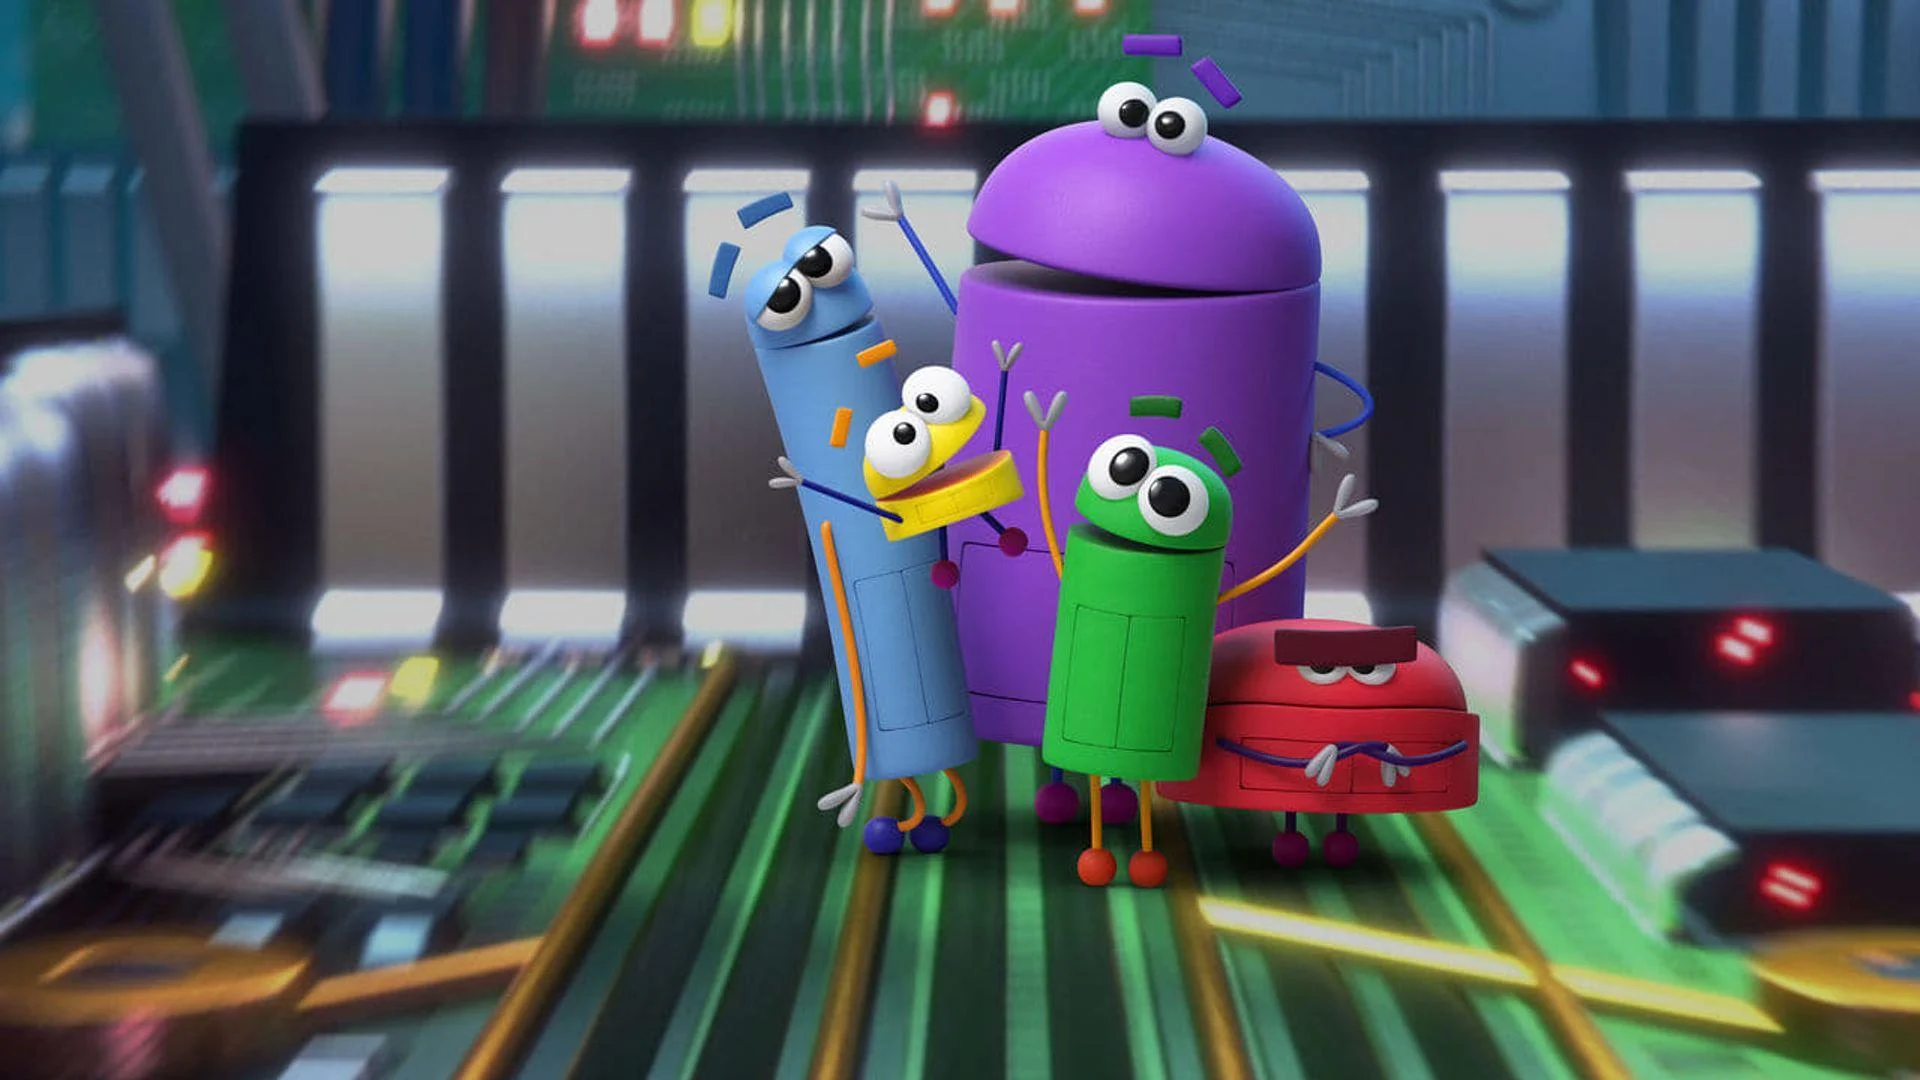 Join the StoryBots, colorful characters who seek answers to kids' big questions, as they embark on educational adventures to explore topics like space, dinosaurs, and the human body. It's a fun and educational series for young viewers.]]>